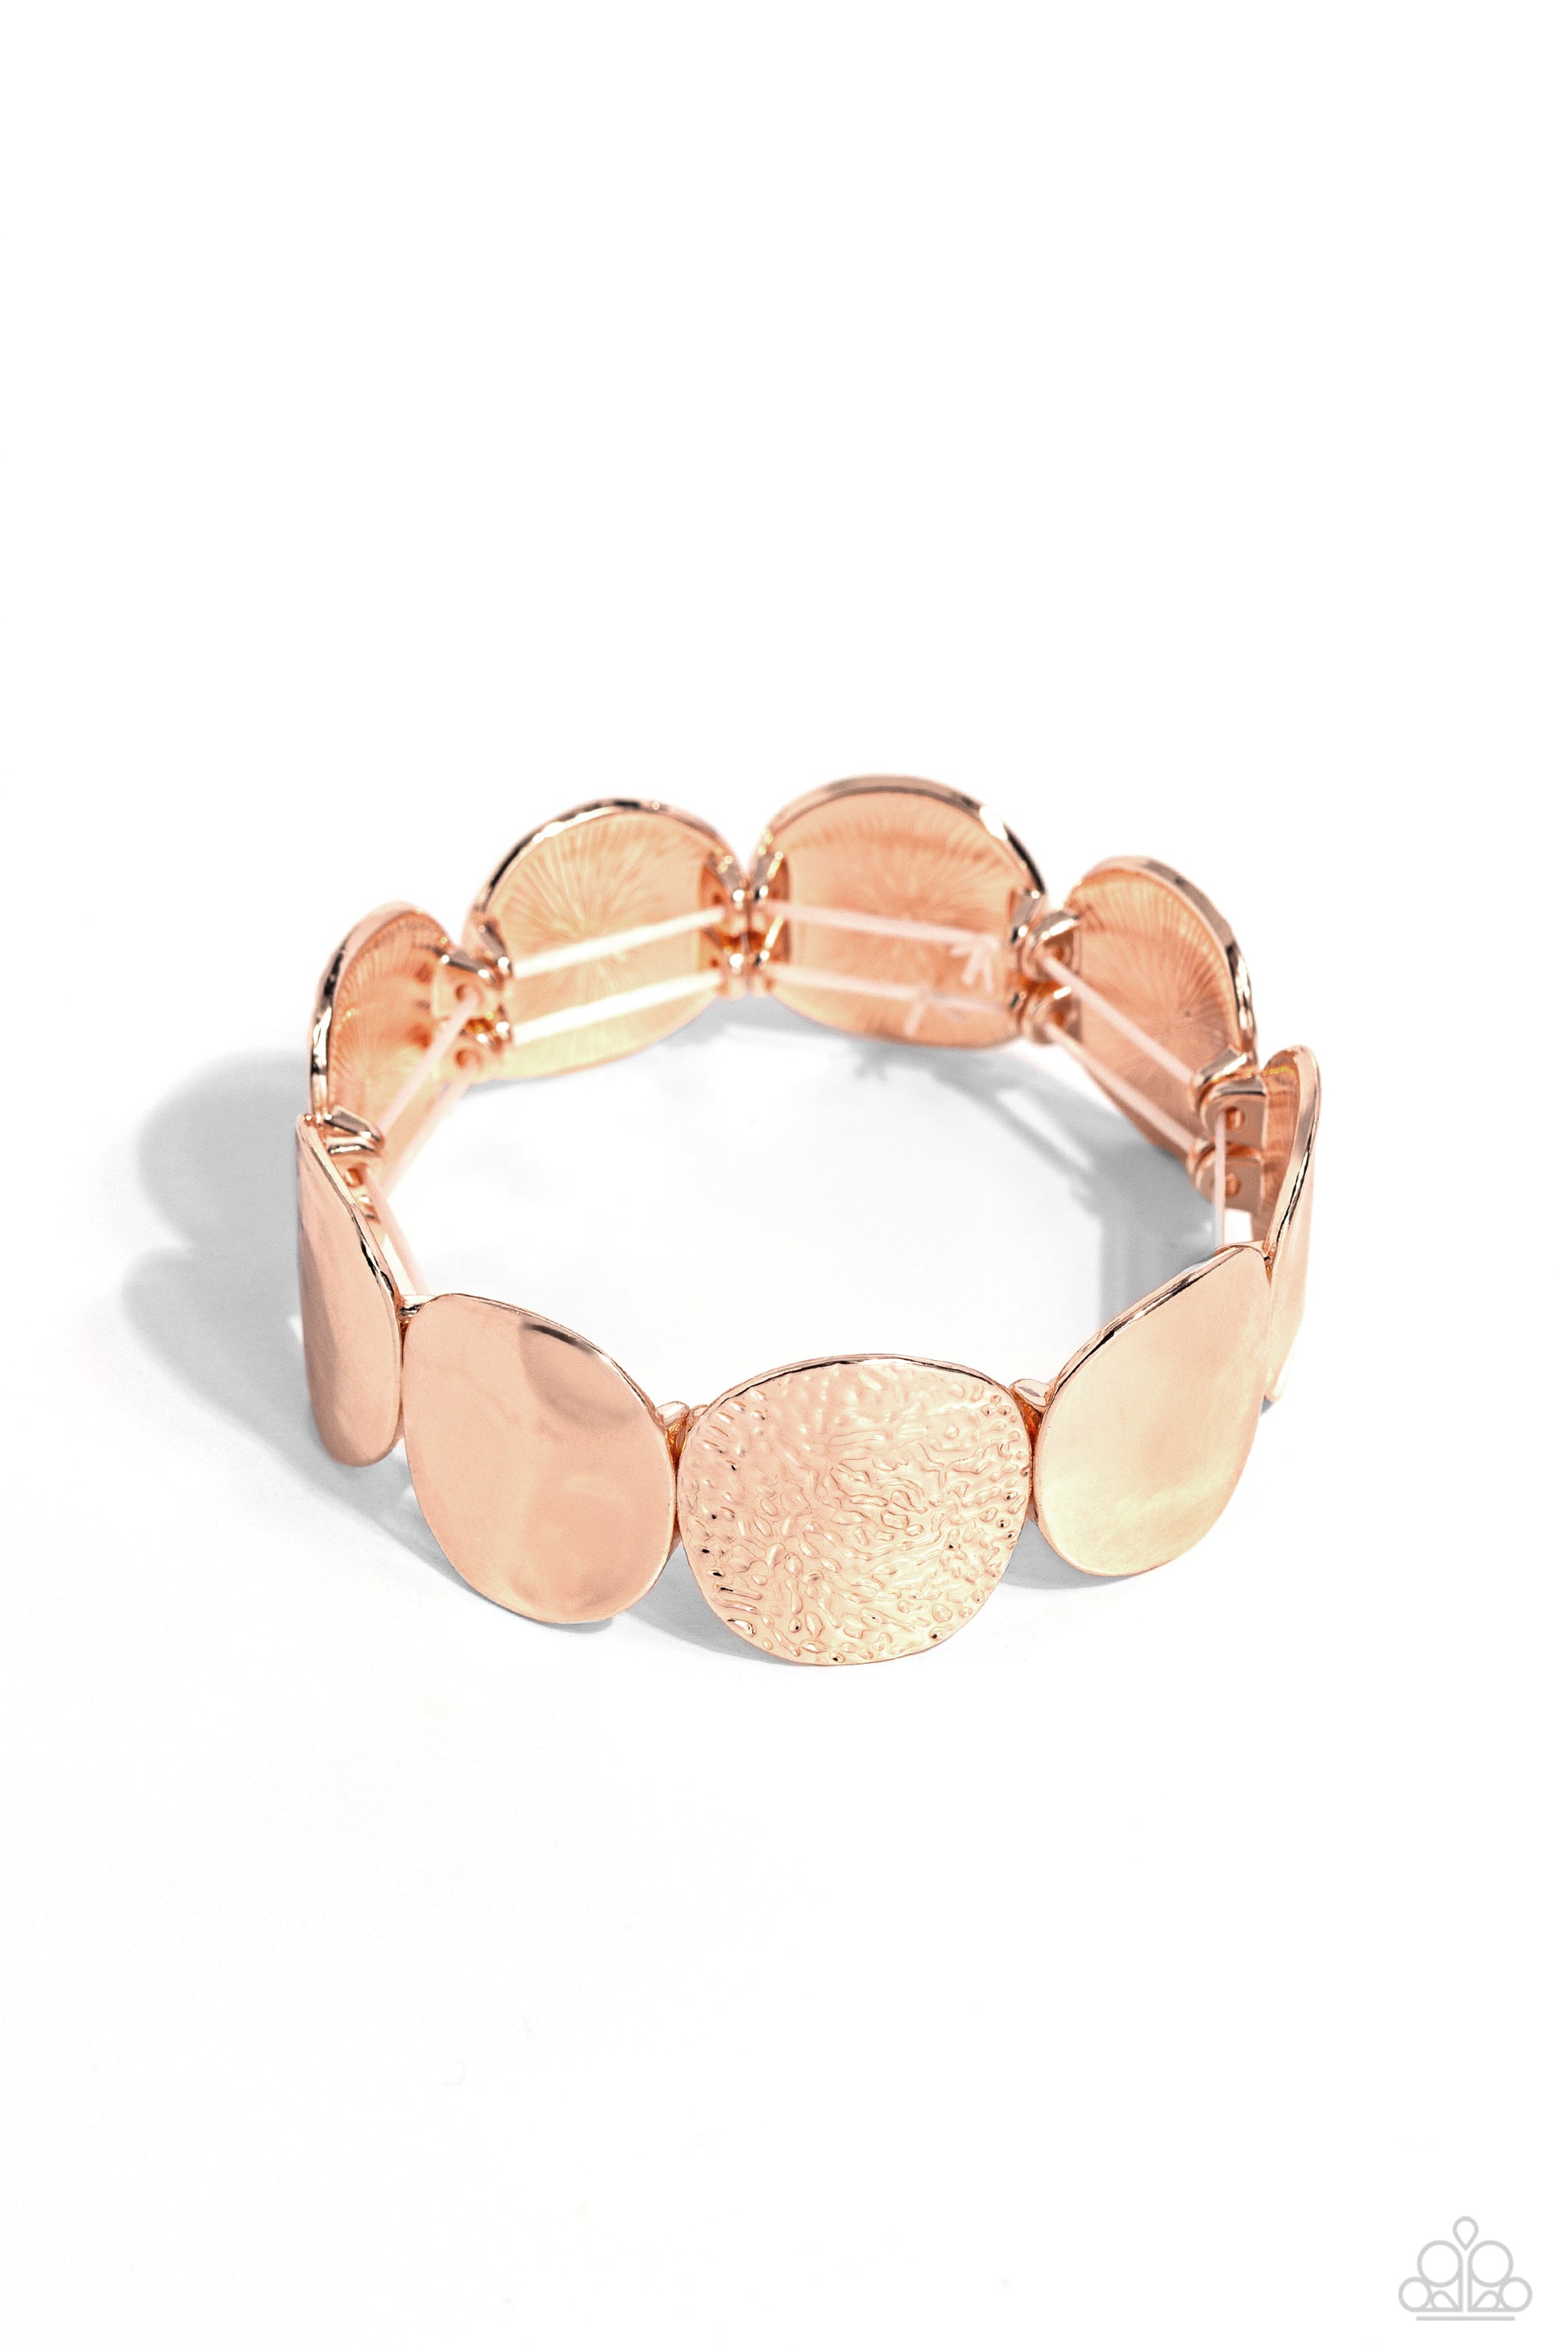 Rippling Record Rose Gold Stretch Bracelet - Paparazzi Accessories  A hammered collection of asymmetrical rose gold discs are threaded along stretchy bands around the wrist for a refined flair. The rose gold discs feature both a rippling hammered effect and a more subtle hammered effect, creating a fashionable contrast amidst the same color.  Sold as one individual bracelet.  Sku:  P9BA-GDRS-121XX